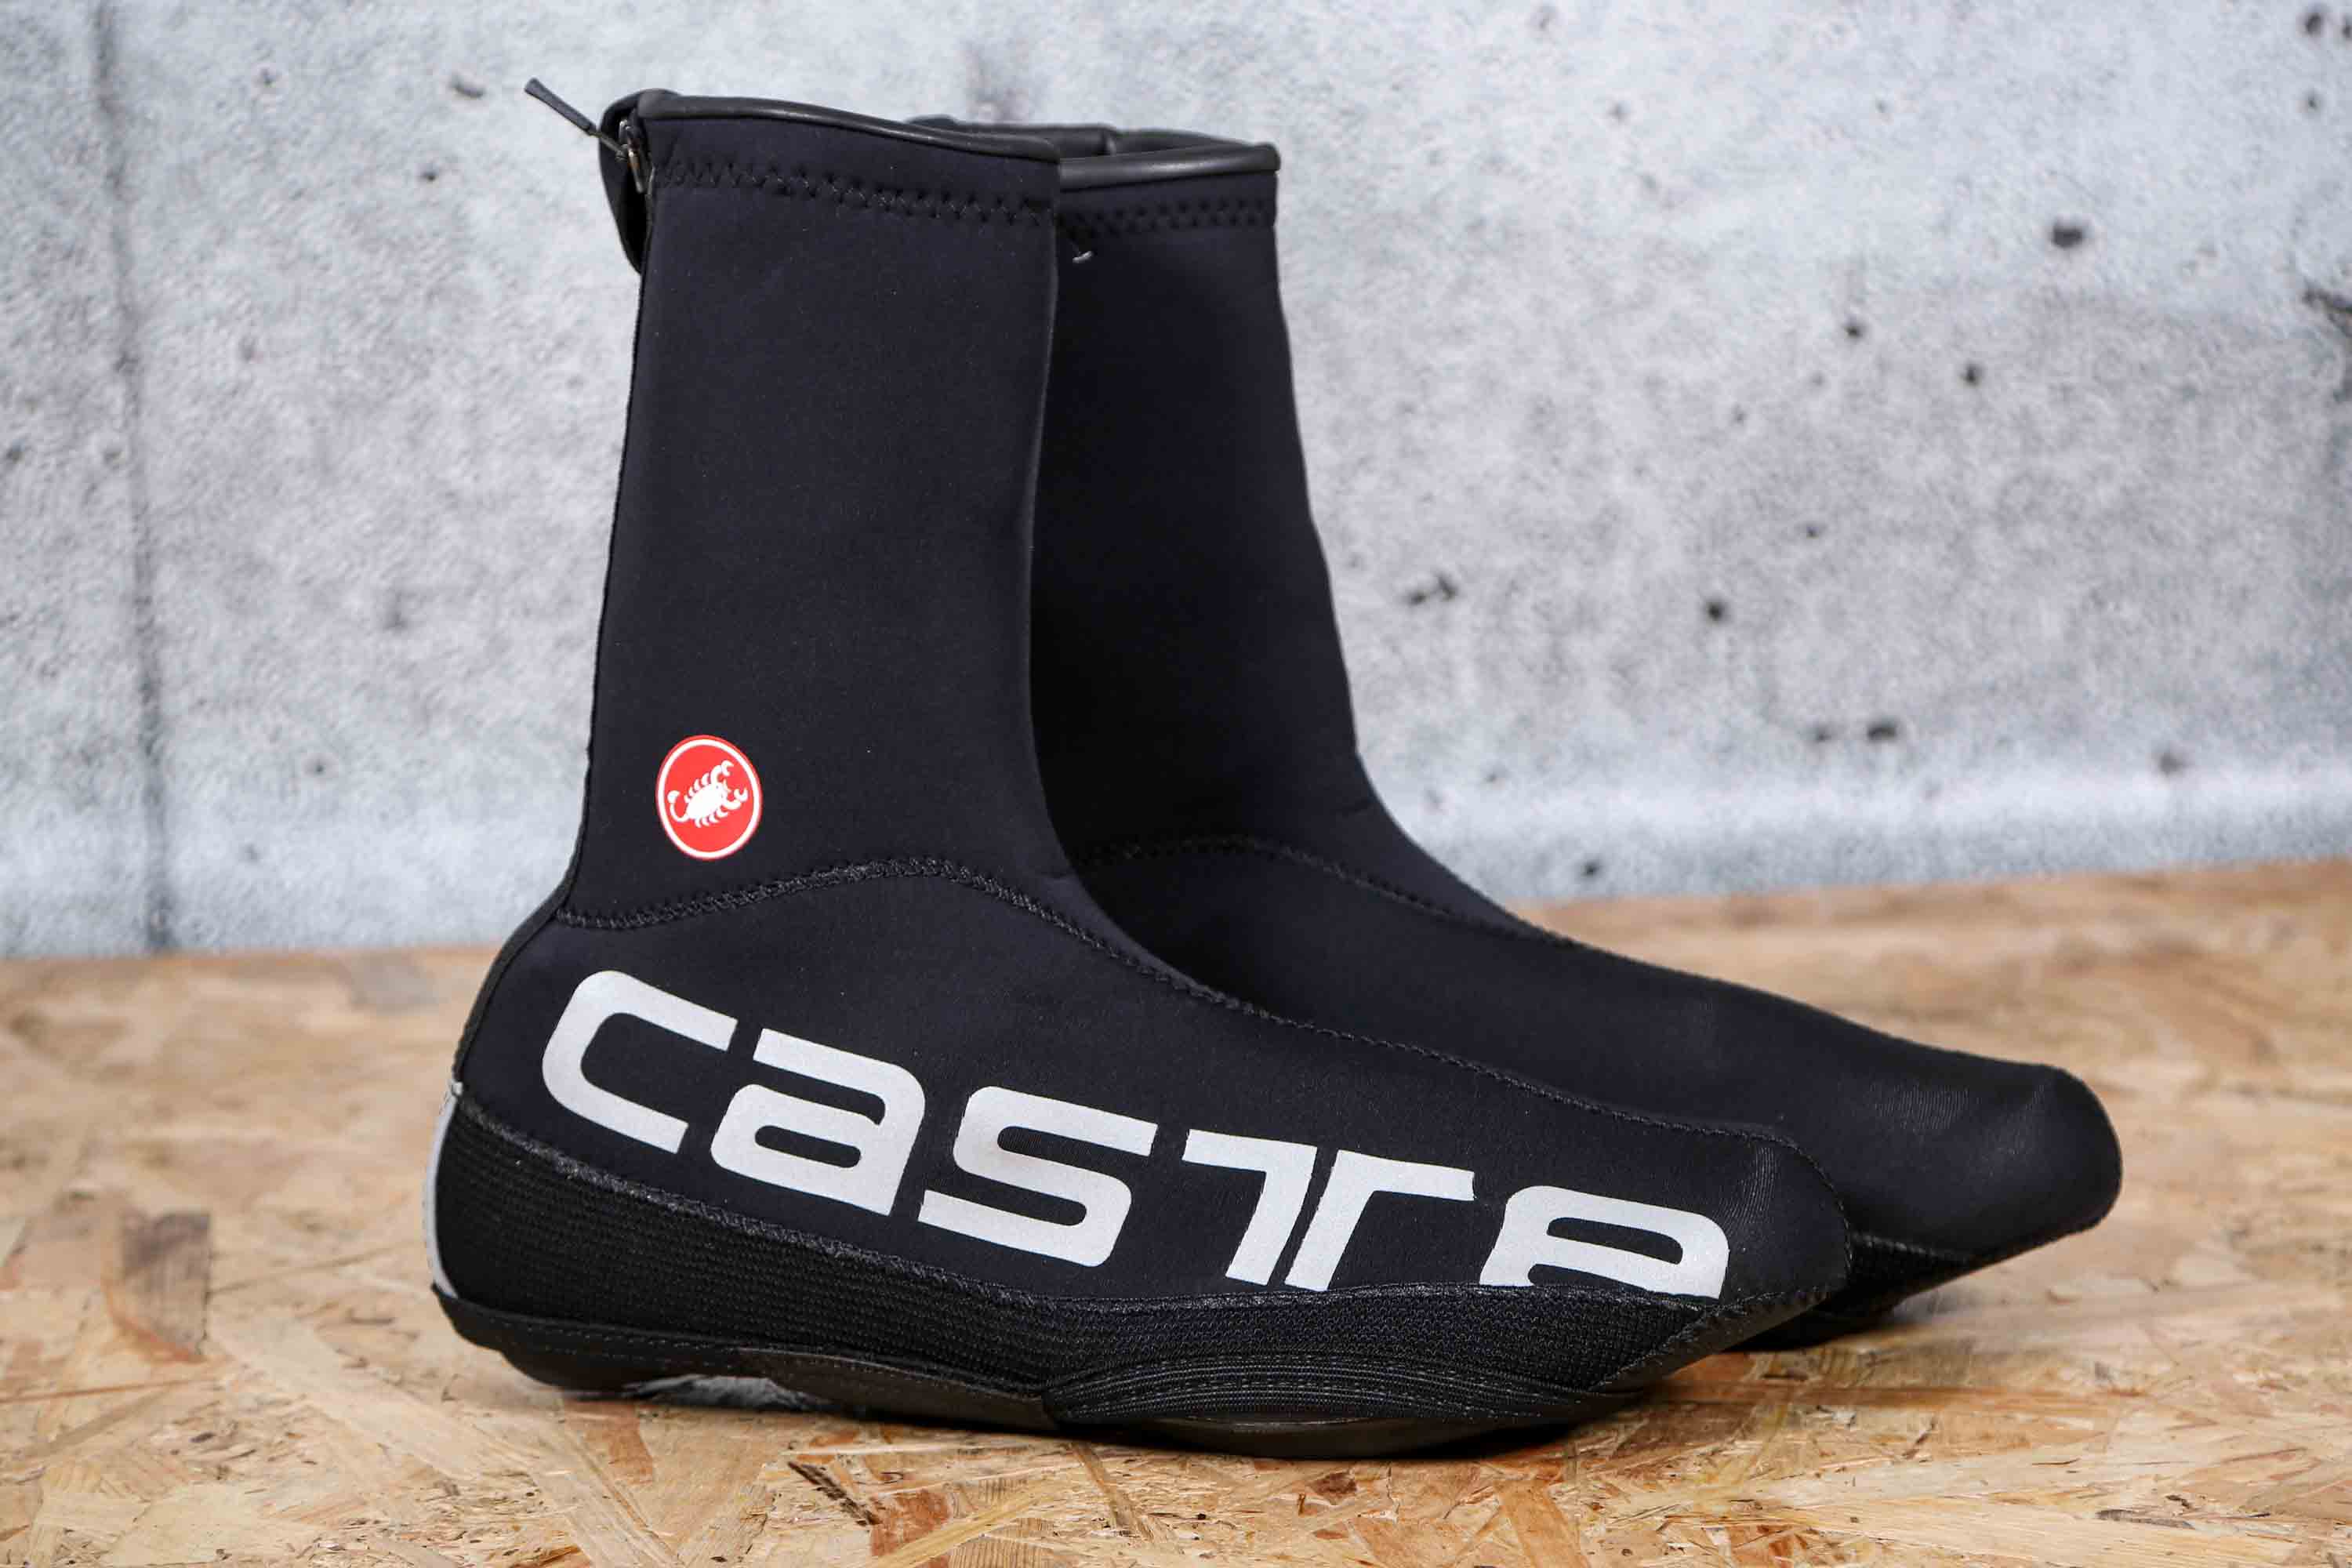 Castelli DILUVIO 2 ALL-ROAD Shoe Covers Cycling Booties BLACK 